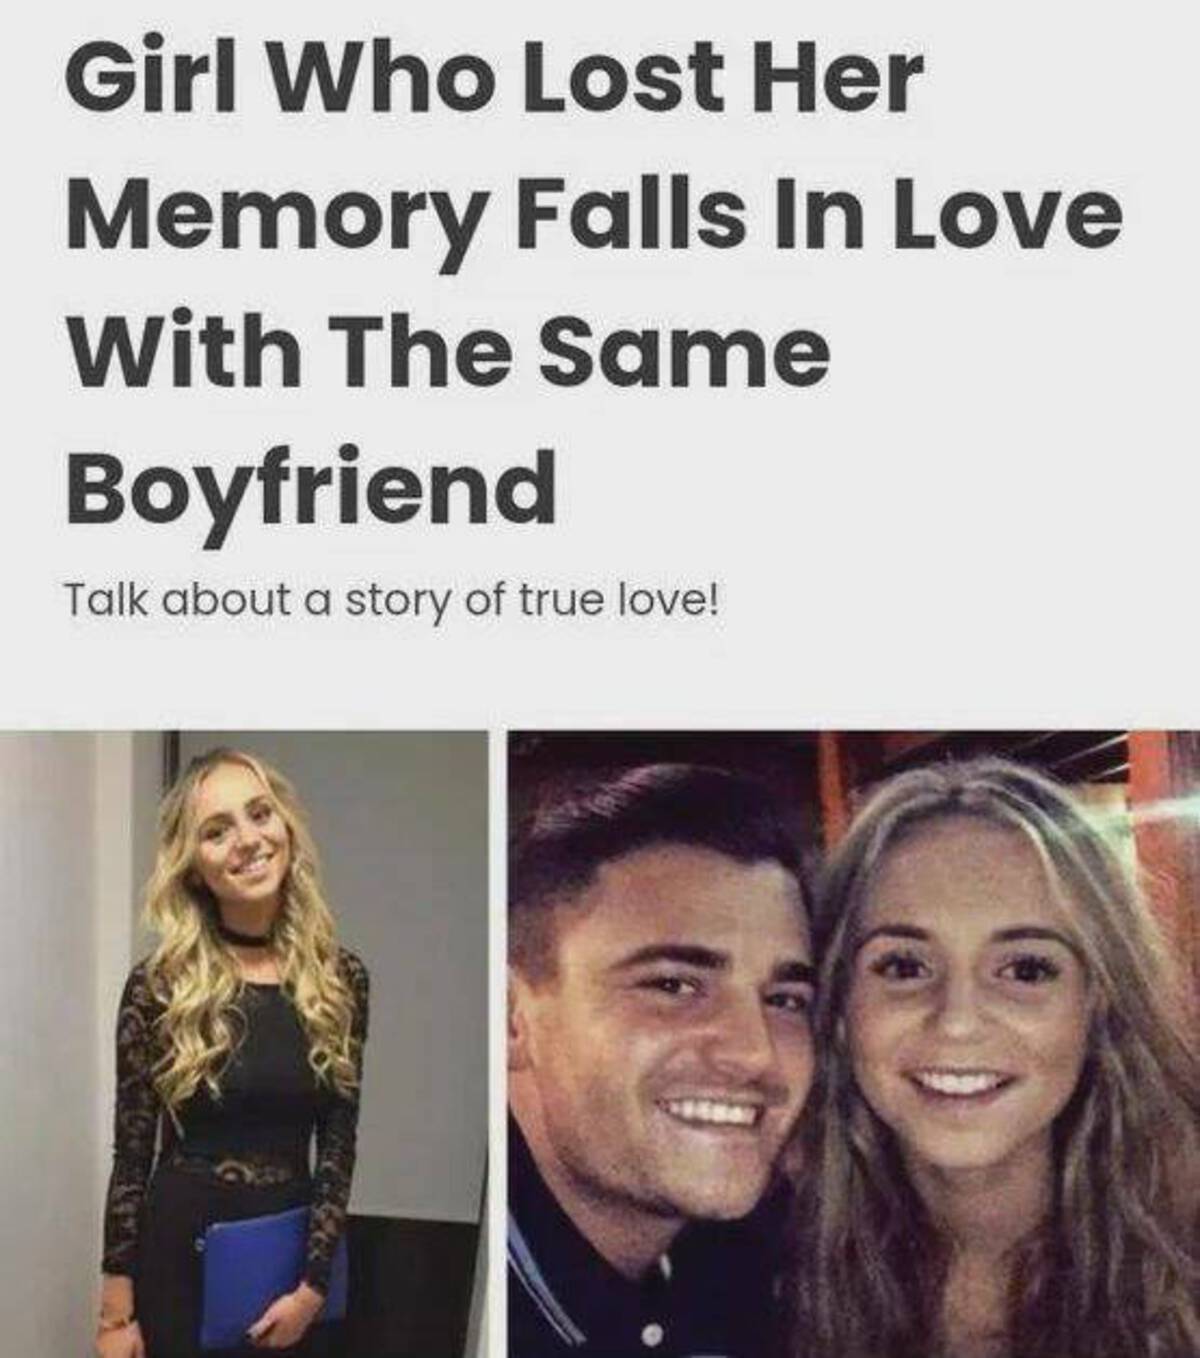 girl loses memory and falls in love - Girl Who Lost Her Memory Falls In Love With The Same Boyfriend Talk about a story of true love!